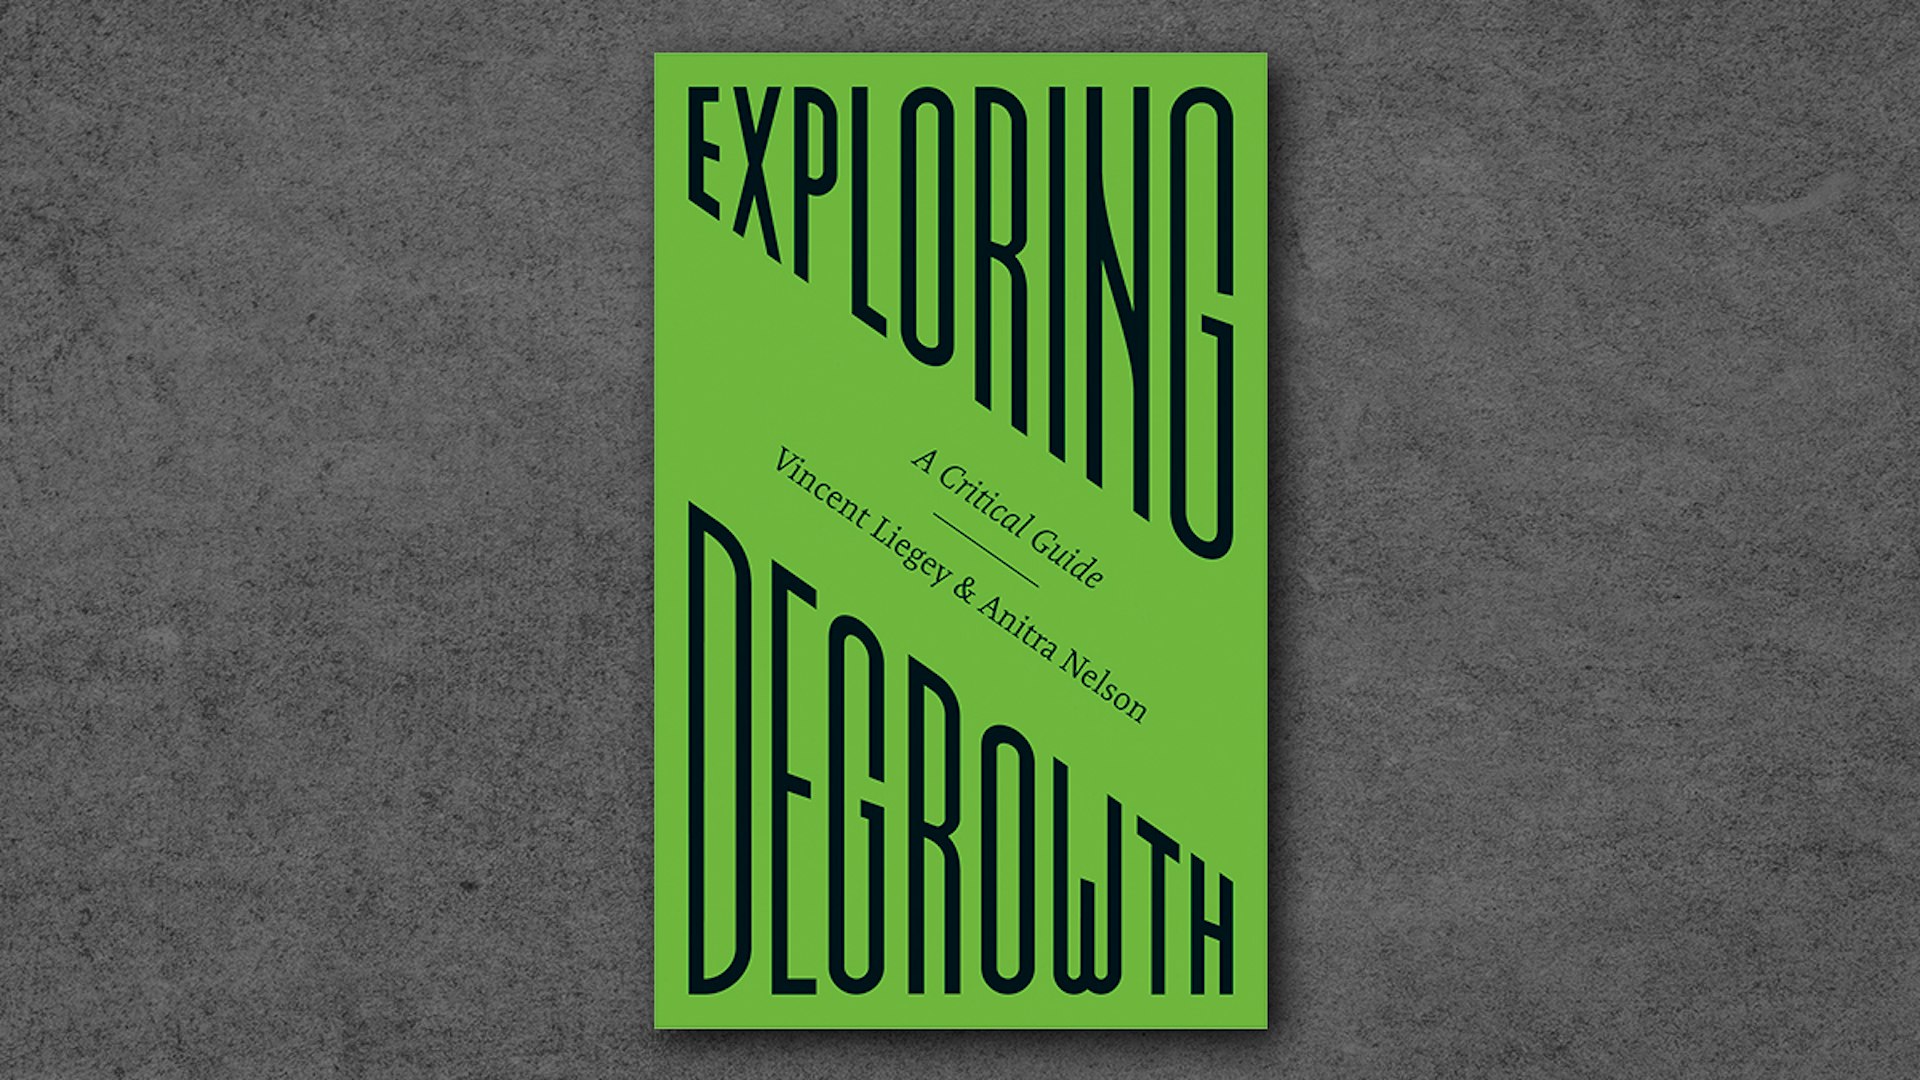 Degrowth is a radical solution to the climate crisis